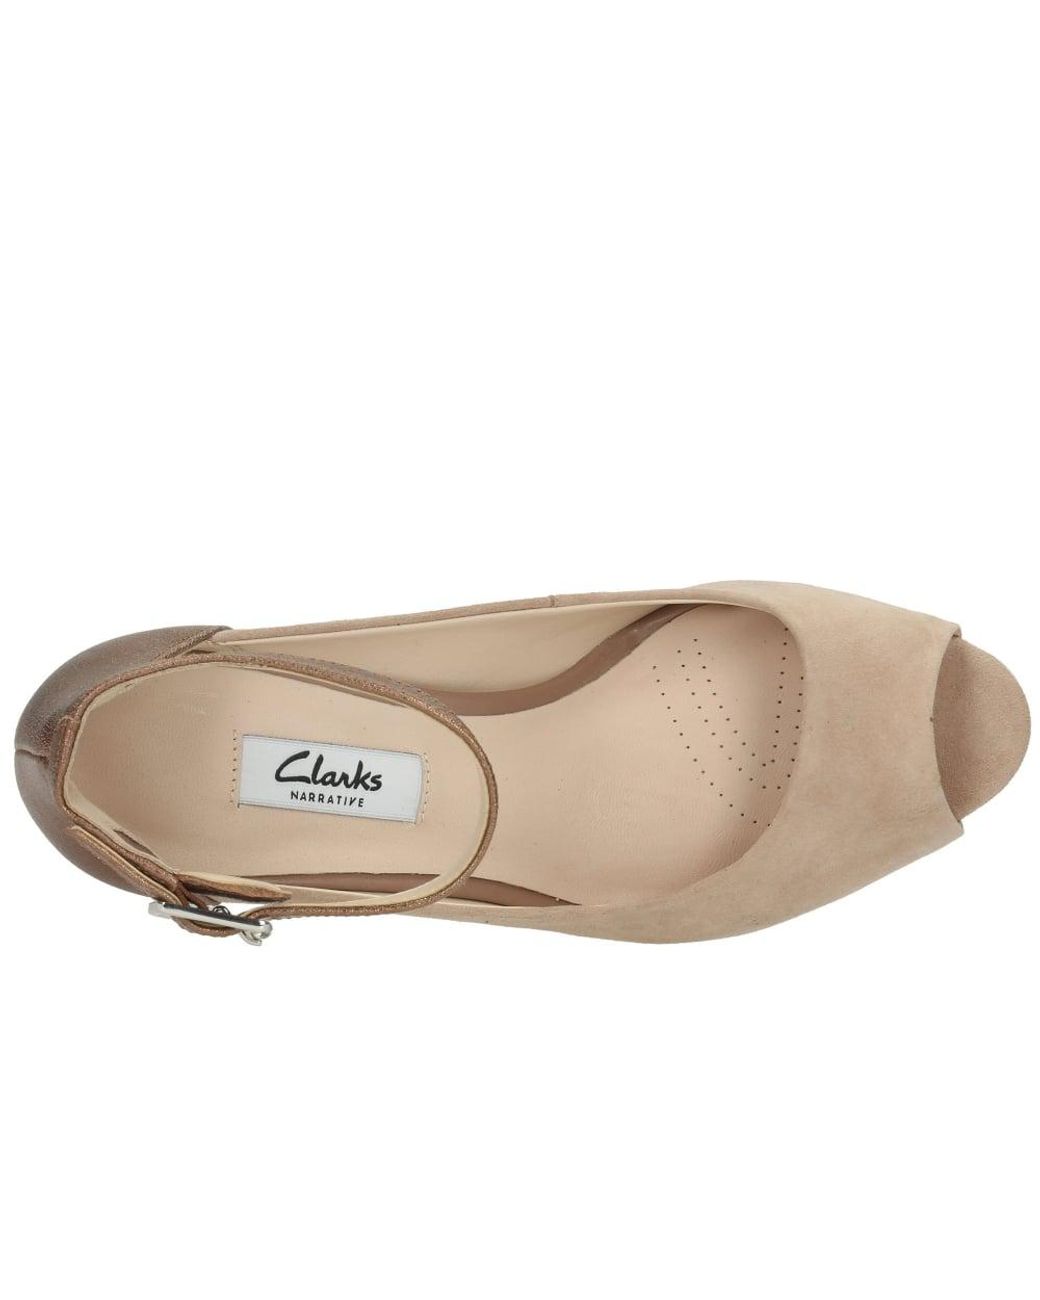 Clarks Kendra Ella Womens Shoes in Natural | Lyst Canada